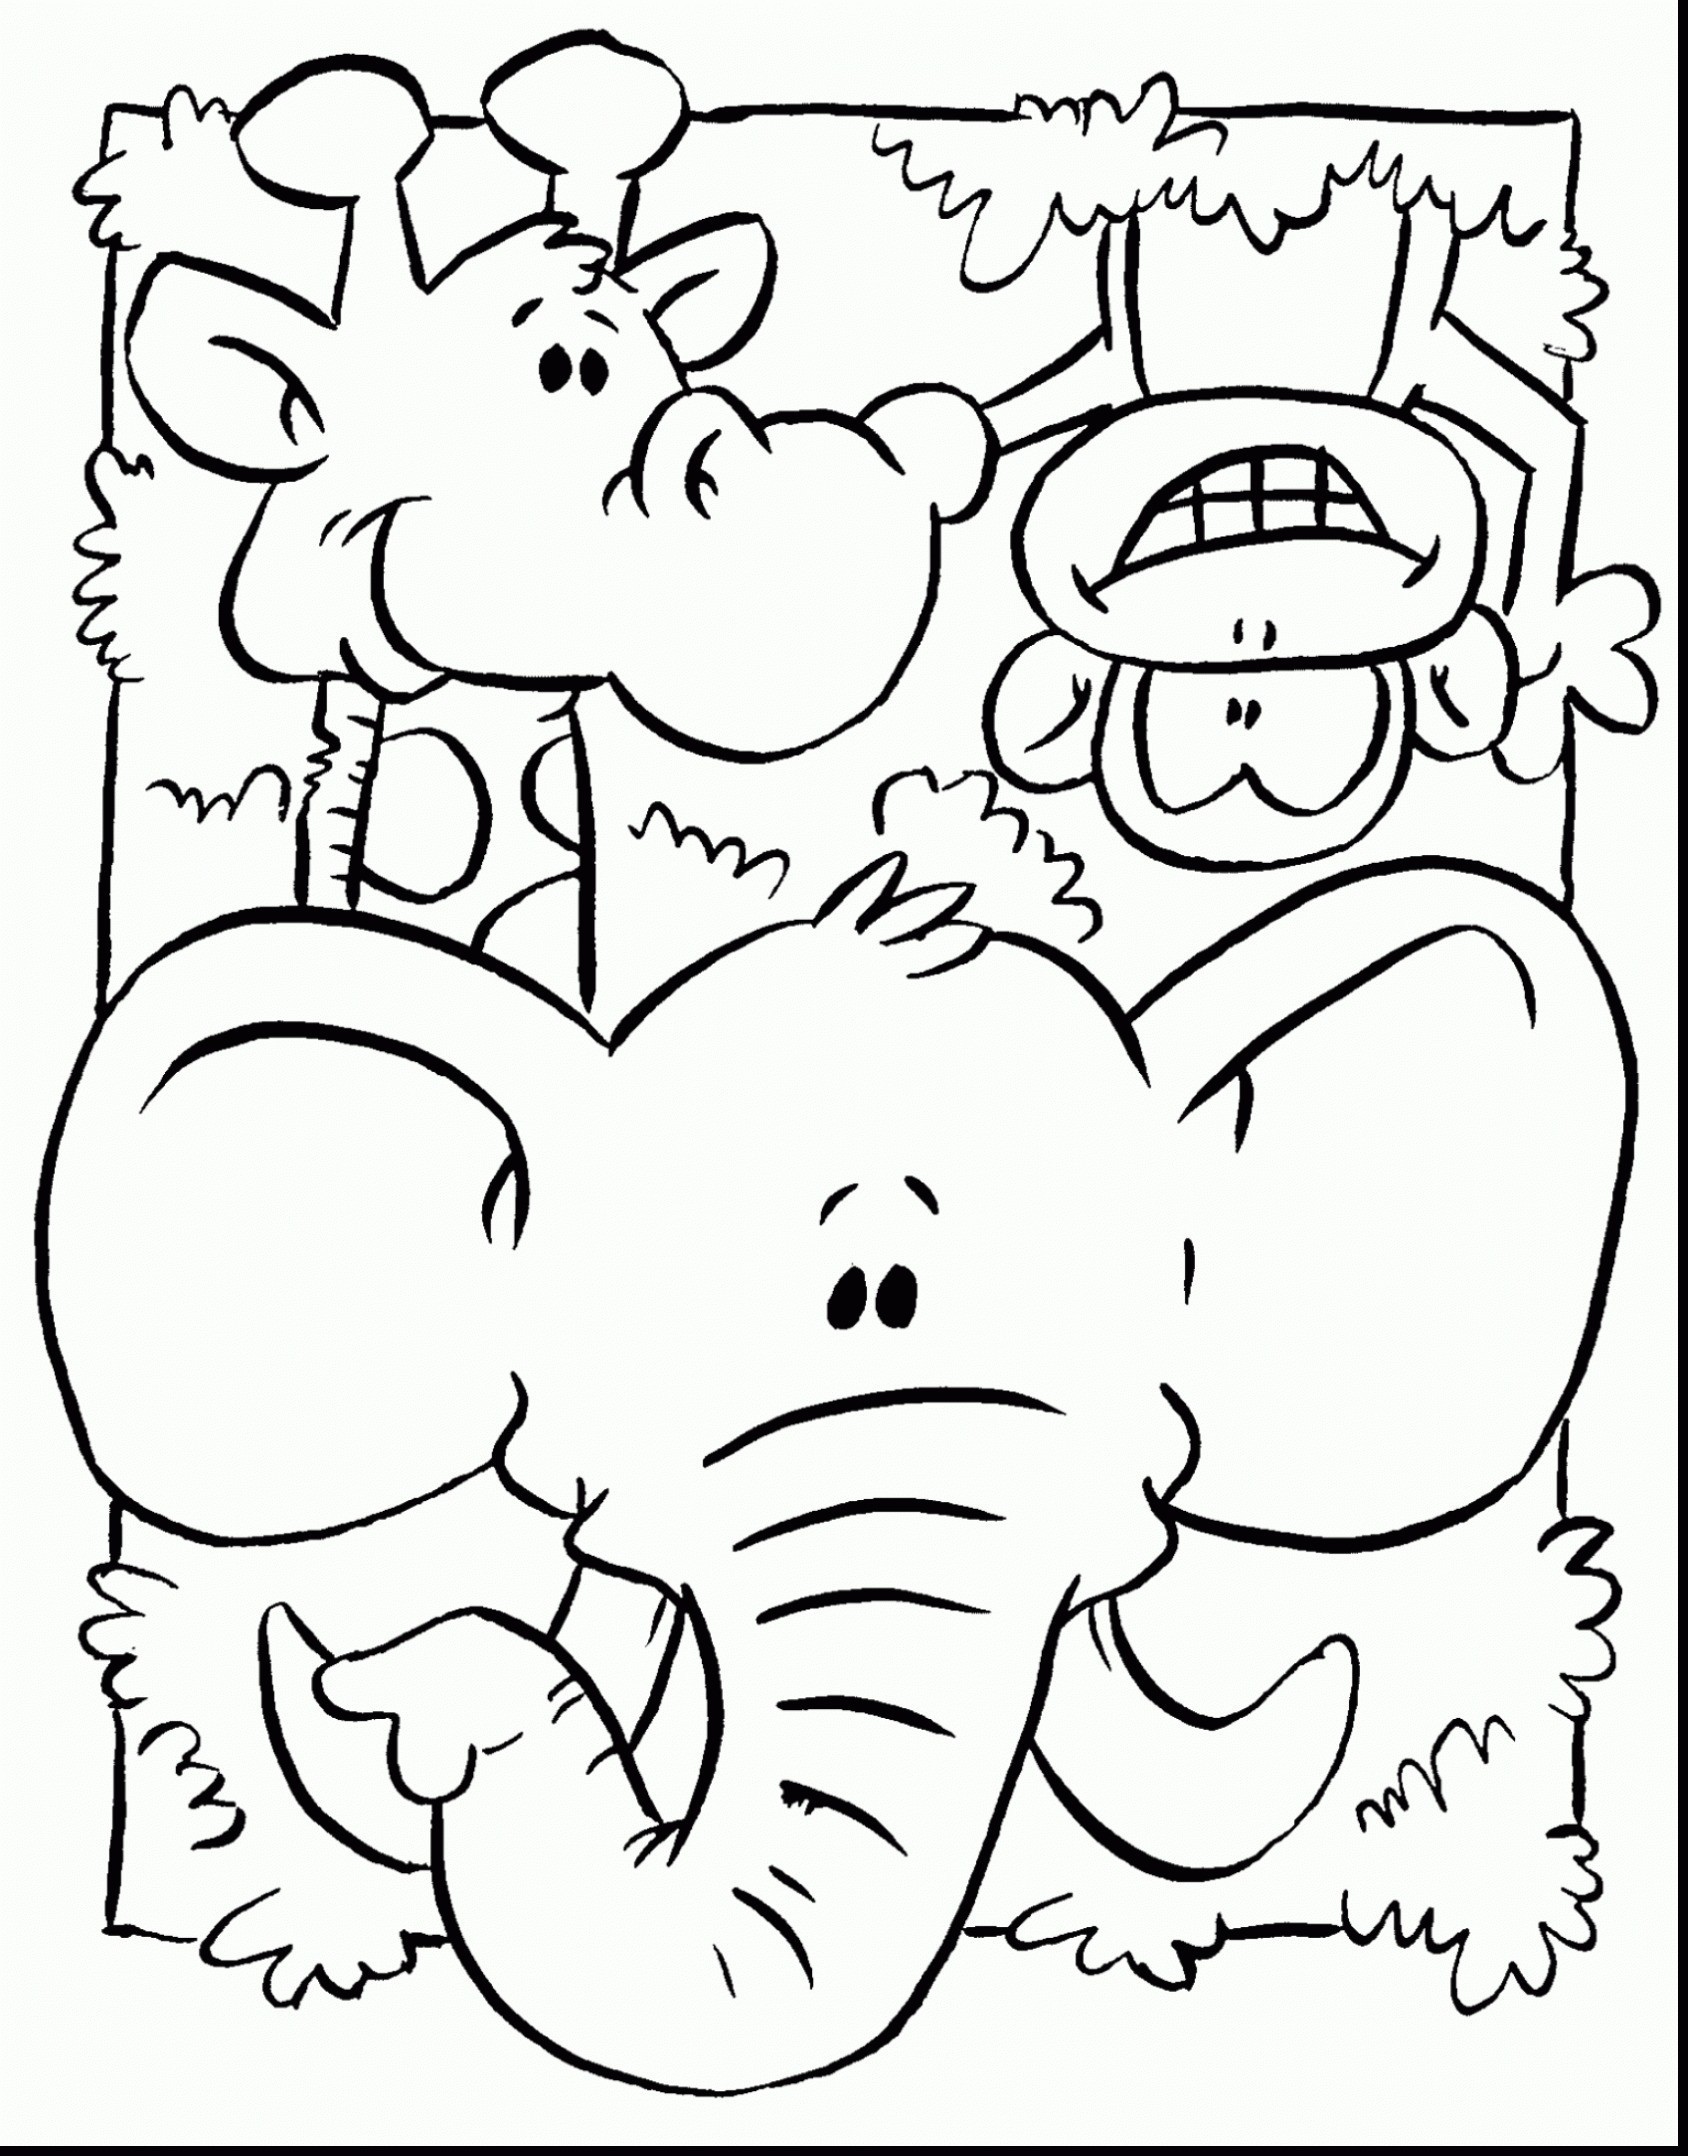 Coloring Pages Of Zoo Animals Wallpaper